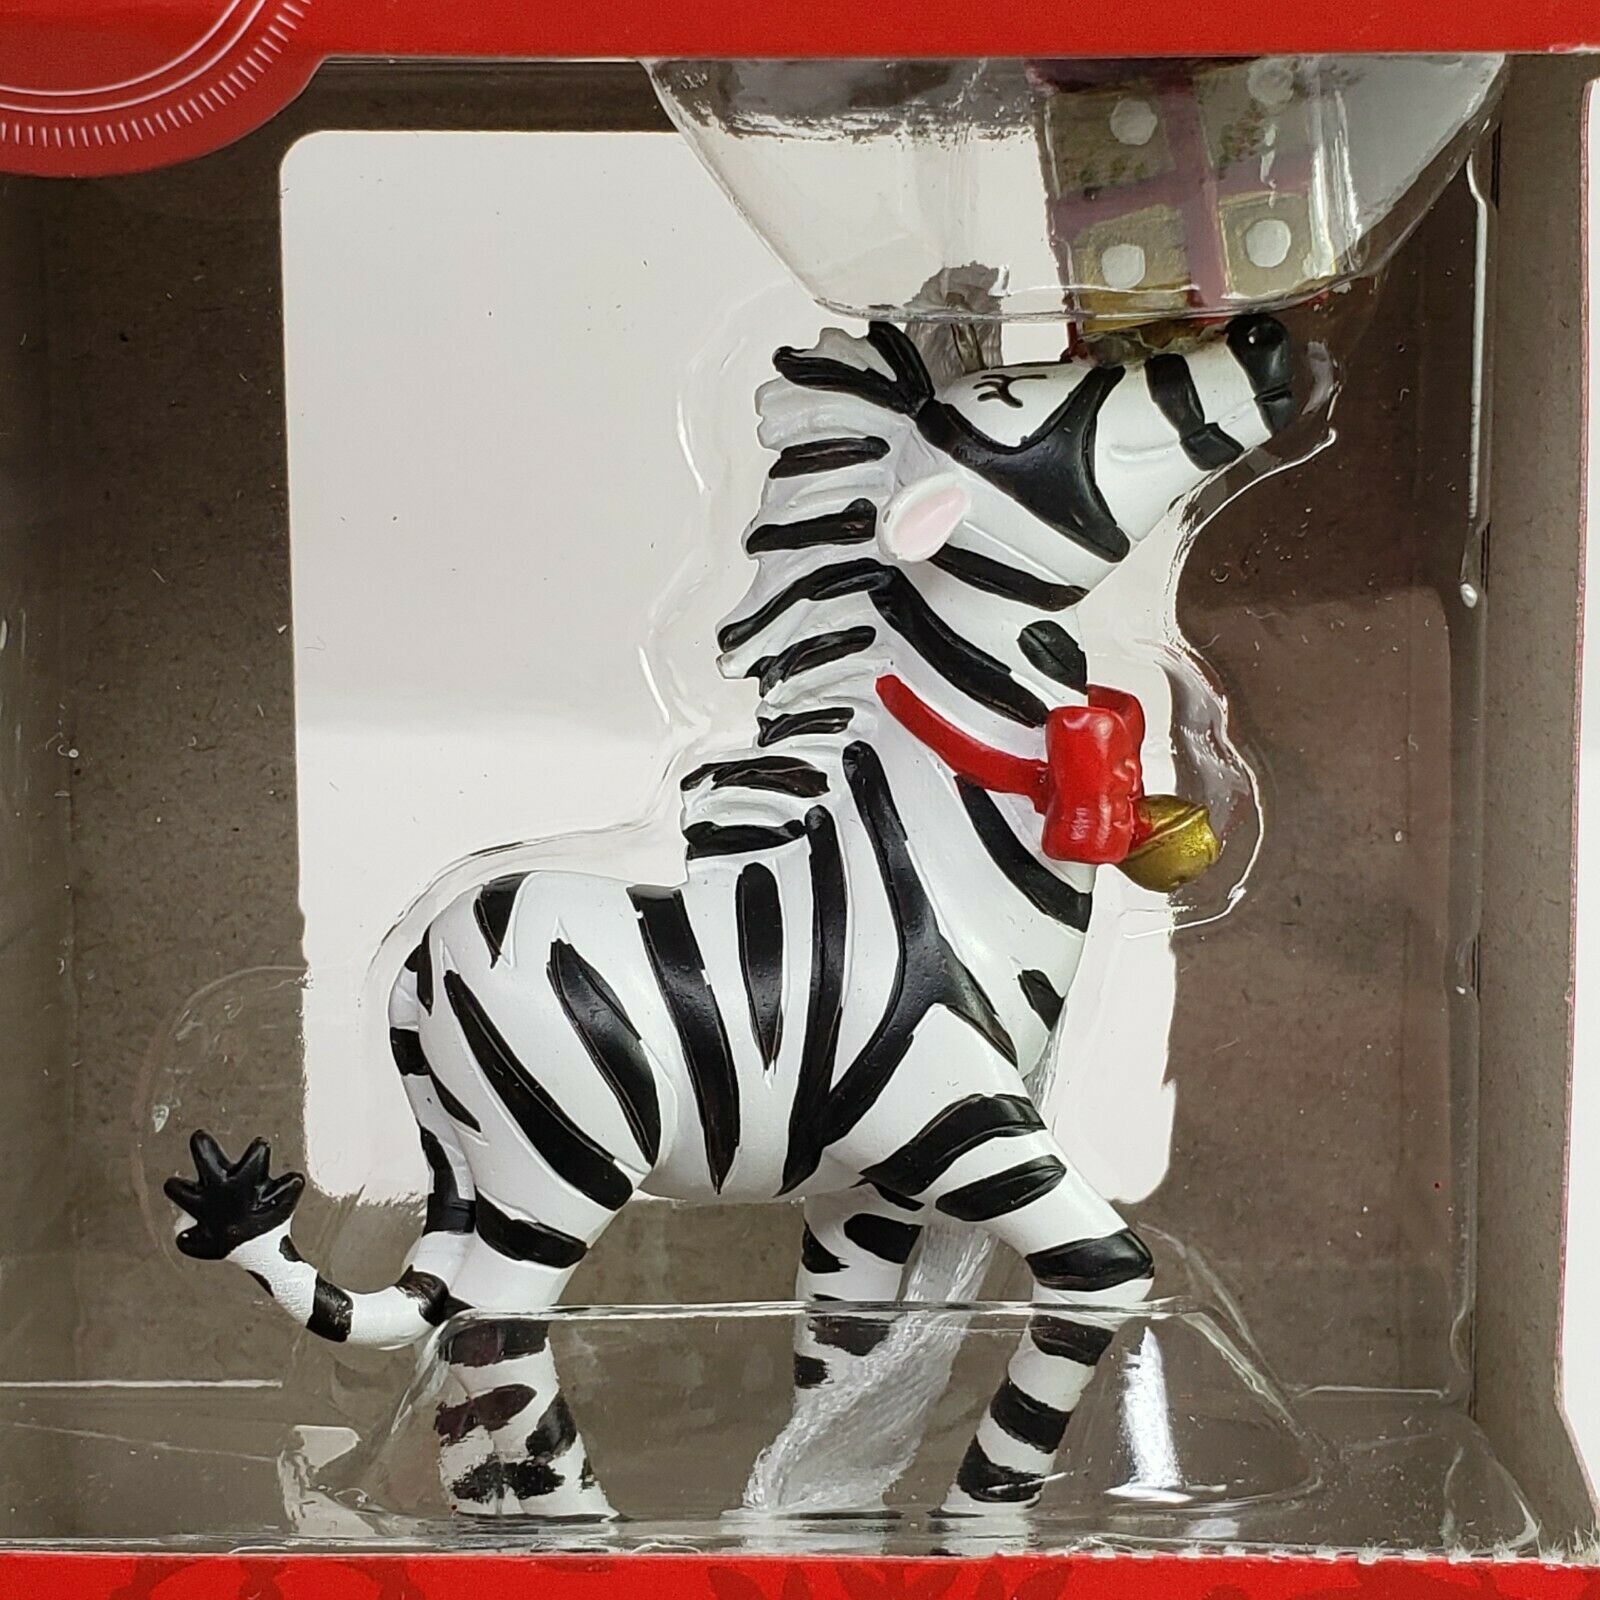 Primary image for Hallmark Prancing Zebra Christmas Tree Ornament with Gift Box Walmart Exclusive